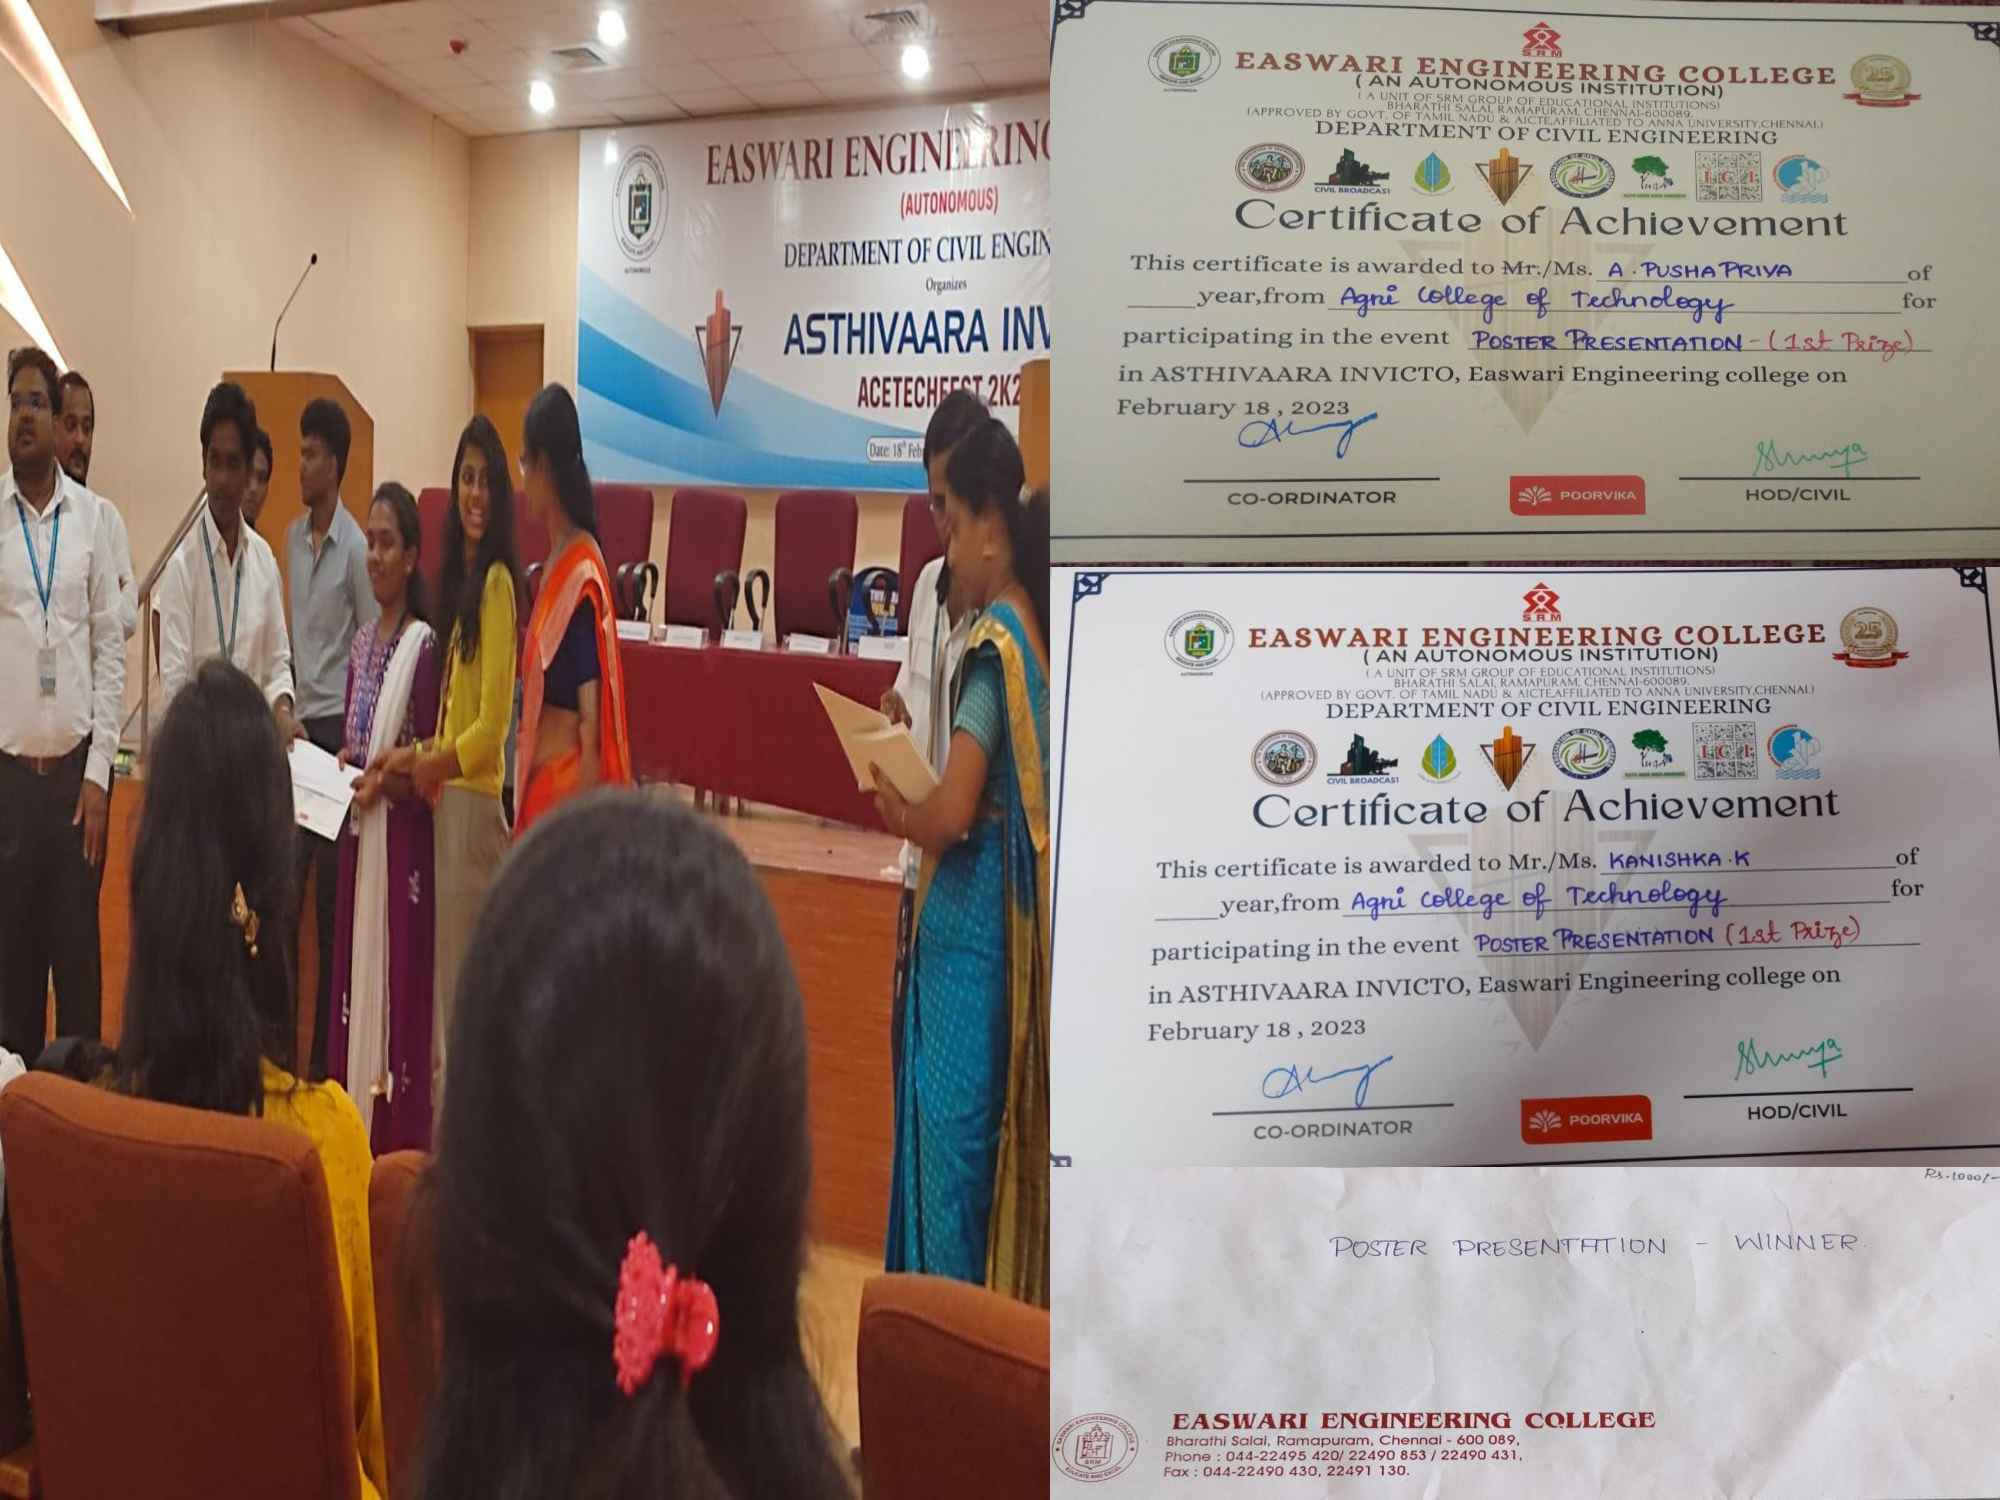 Students secured First Prize in Poster Presentation with the Cash Prize of Rs.1000